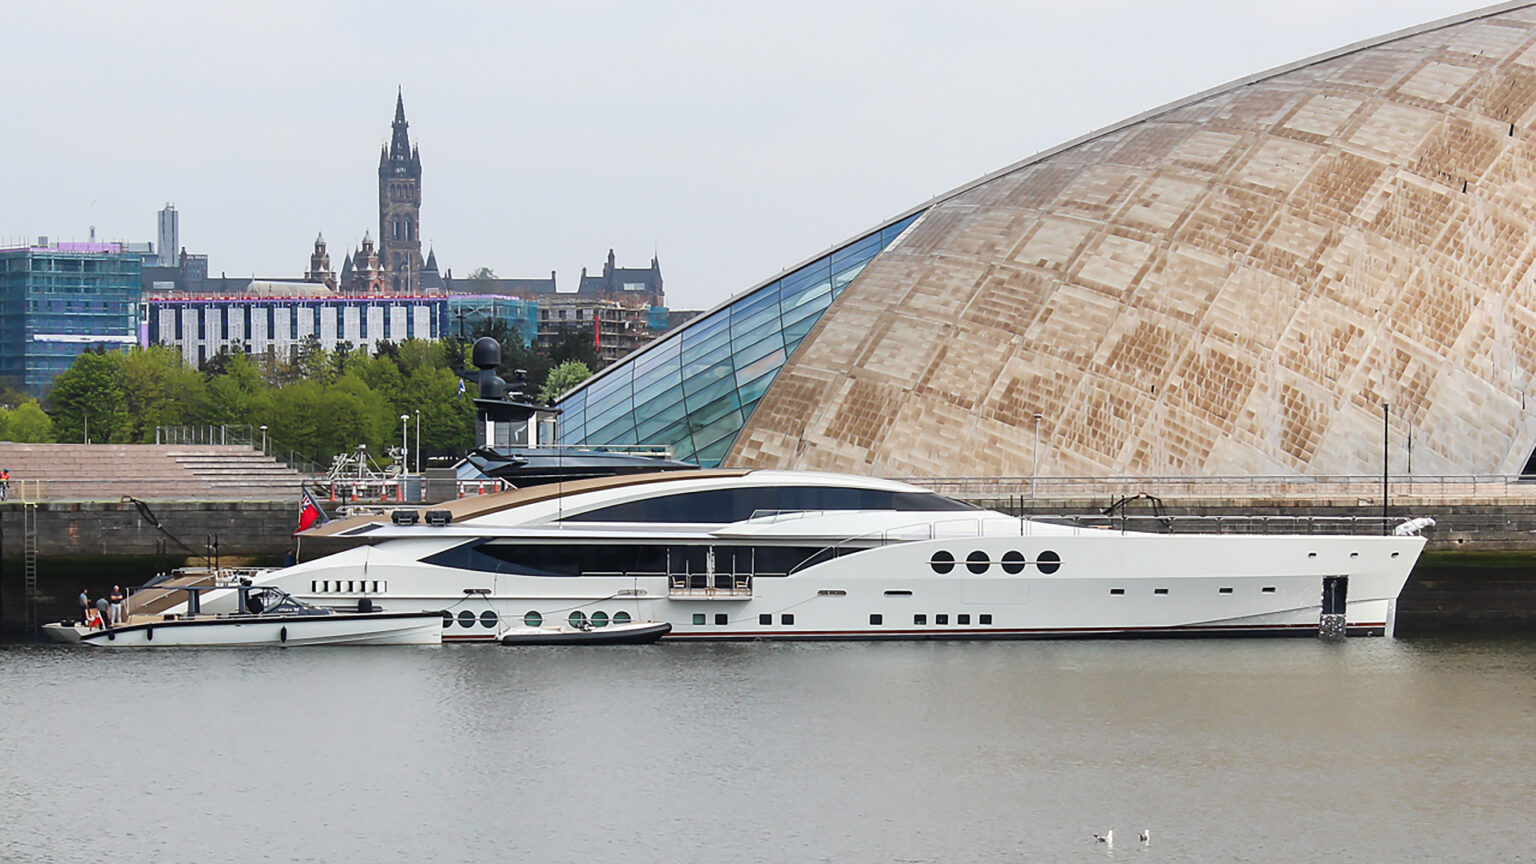 A yacht in calm waters is docked next to a modernist building with a city skyline in the background.